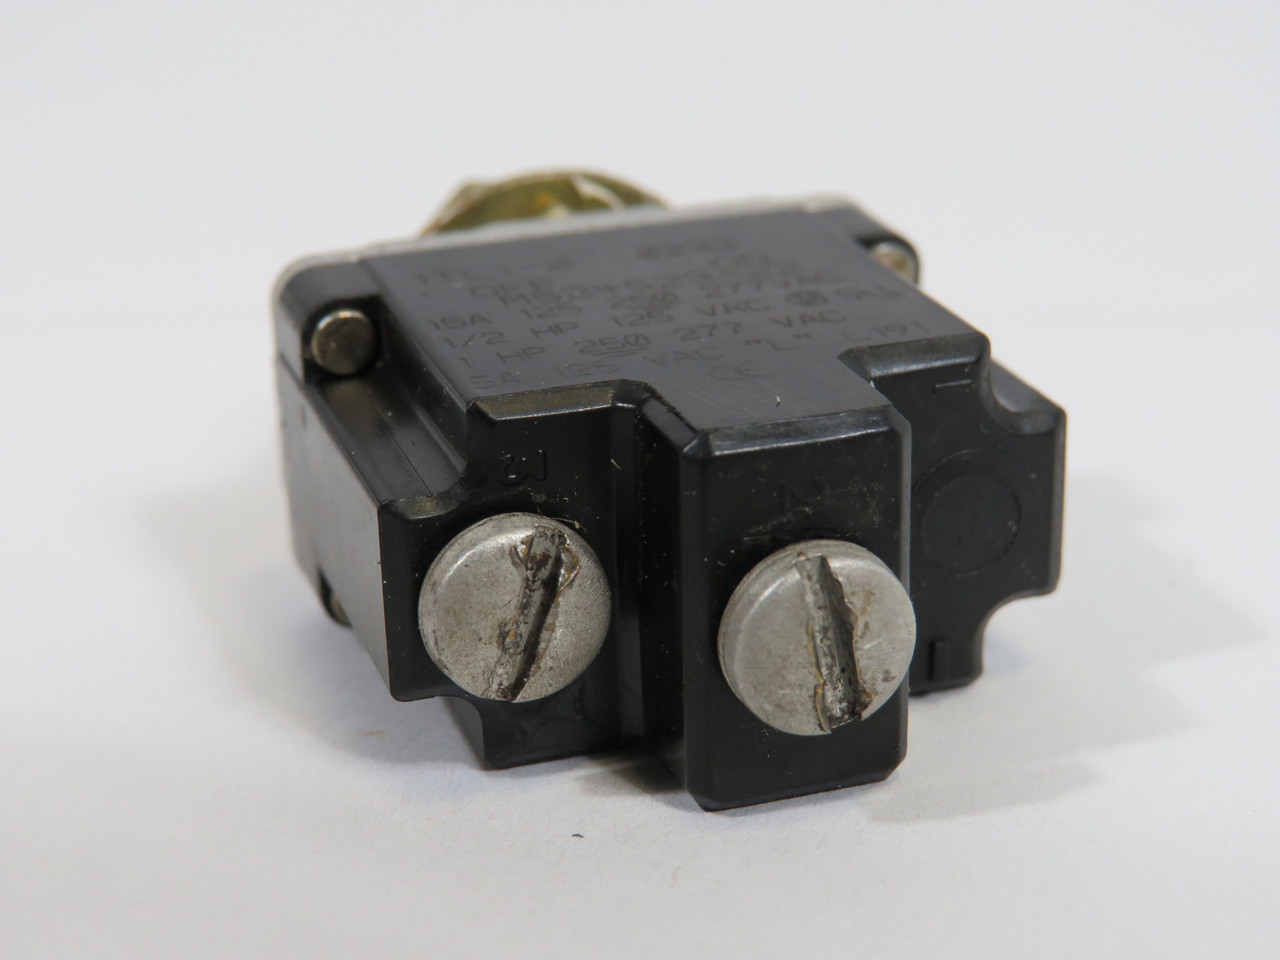 Microswitch 1TL1-2 MS24523-22 2-Position 1-Pole Toggle Switch No Boot USED